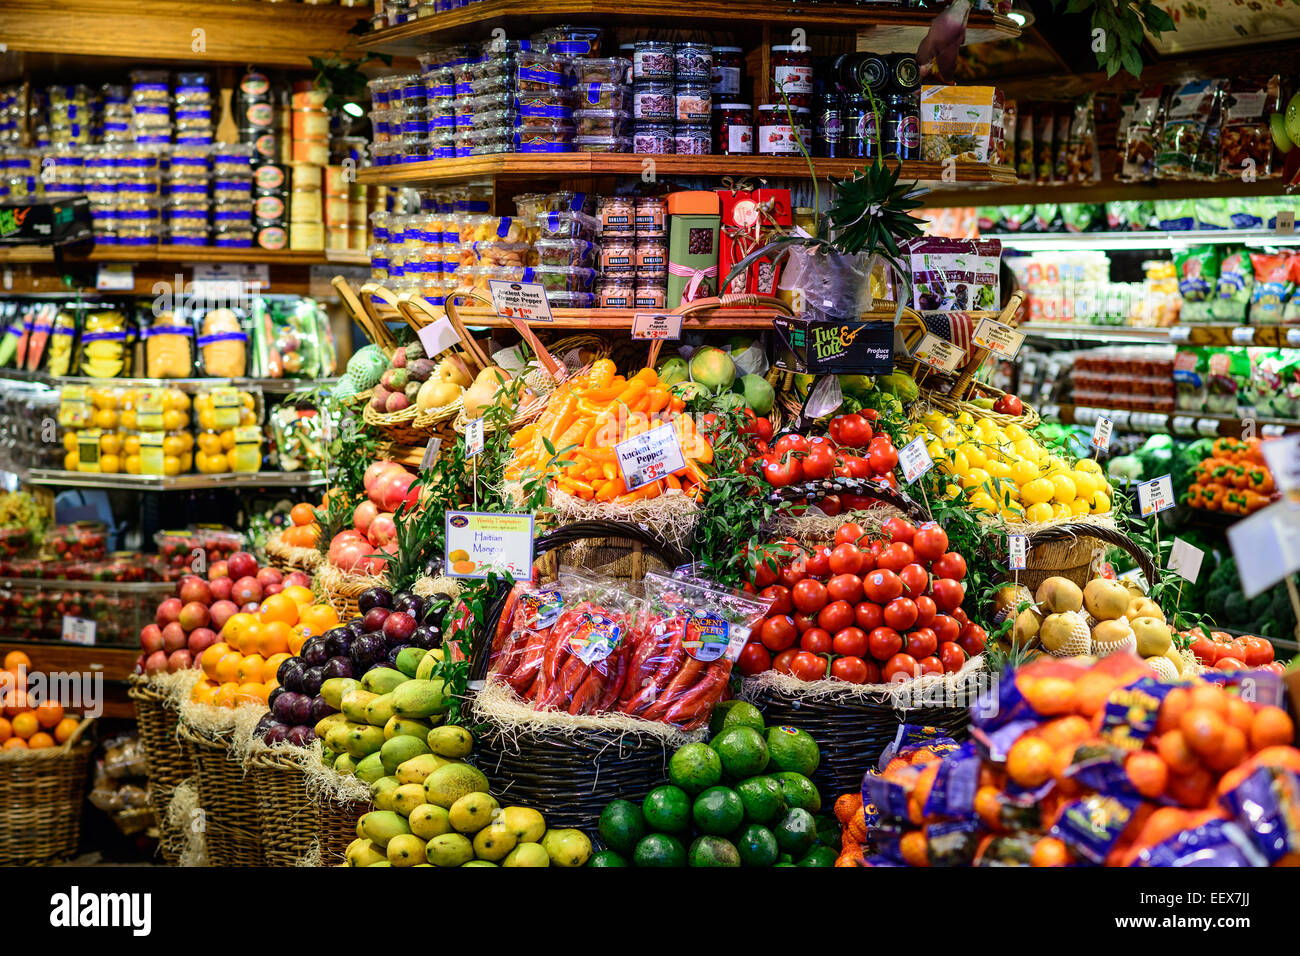 Produce for sale in an upscale bodega on the upper west side. Stock Photo